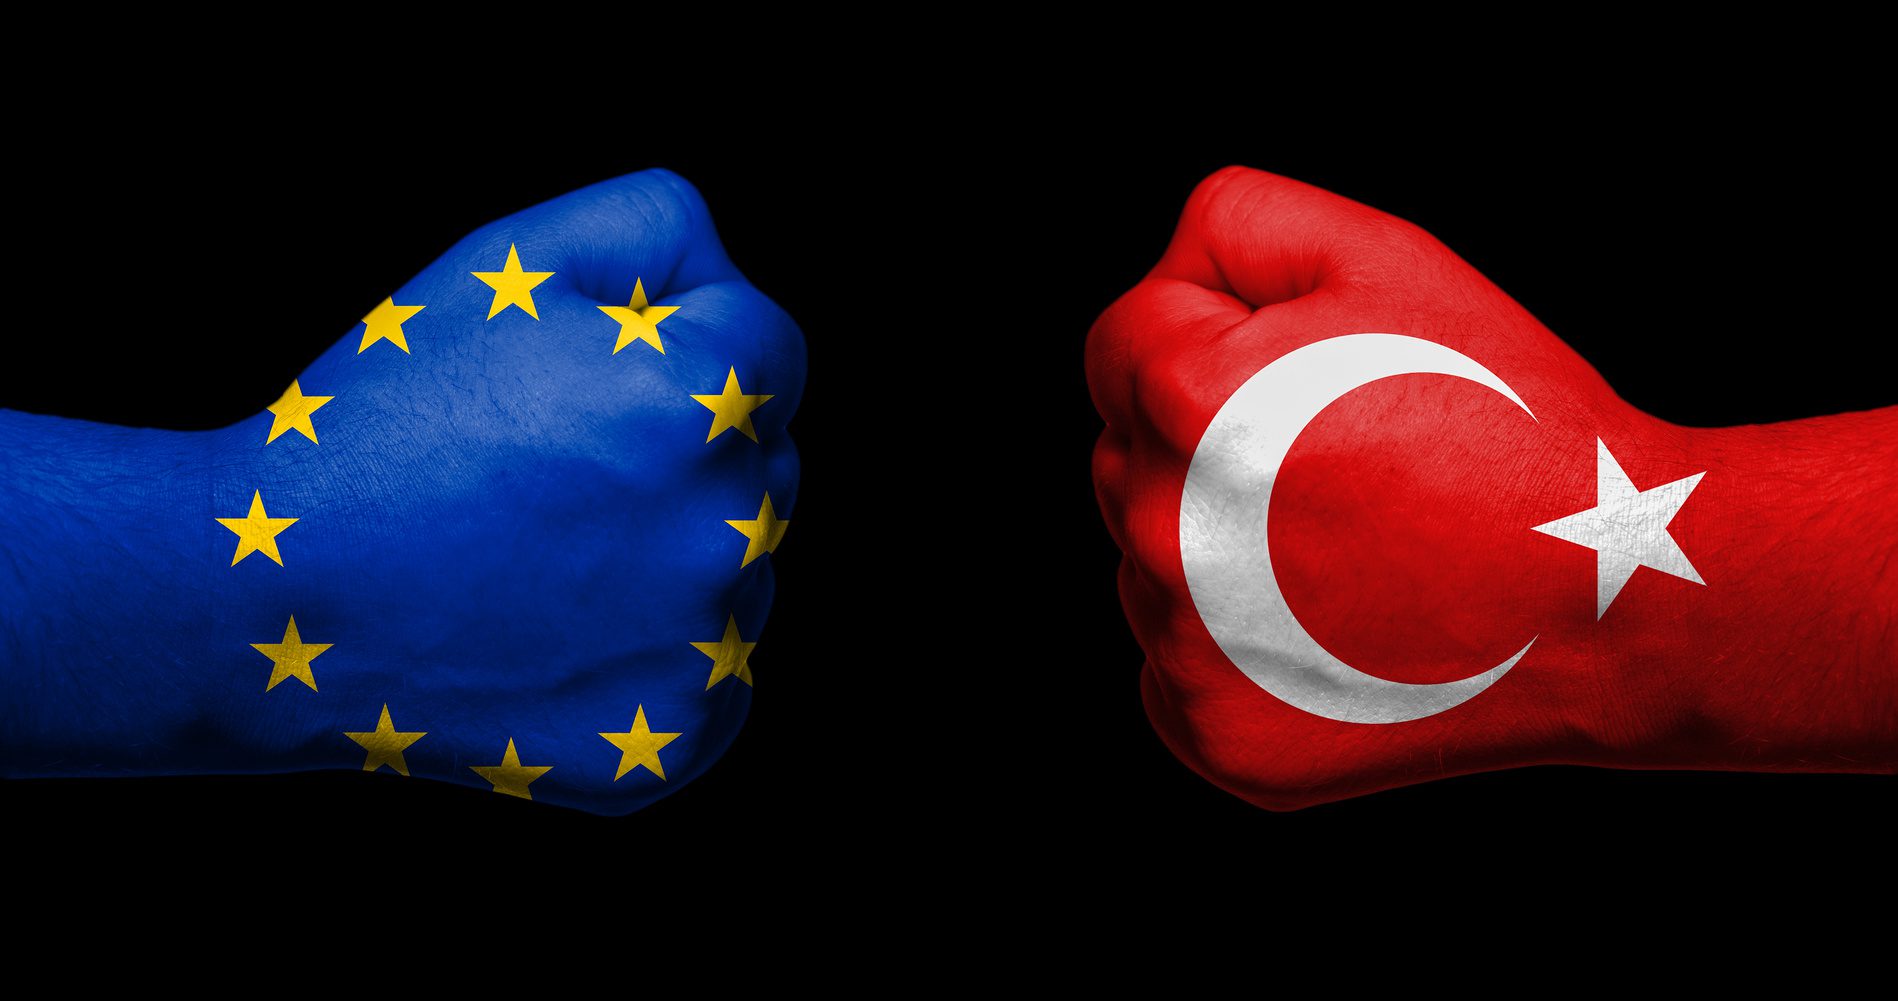 Turkey – When Being ‘The Gateway to Europe’ Wasn’t Good Enough